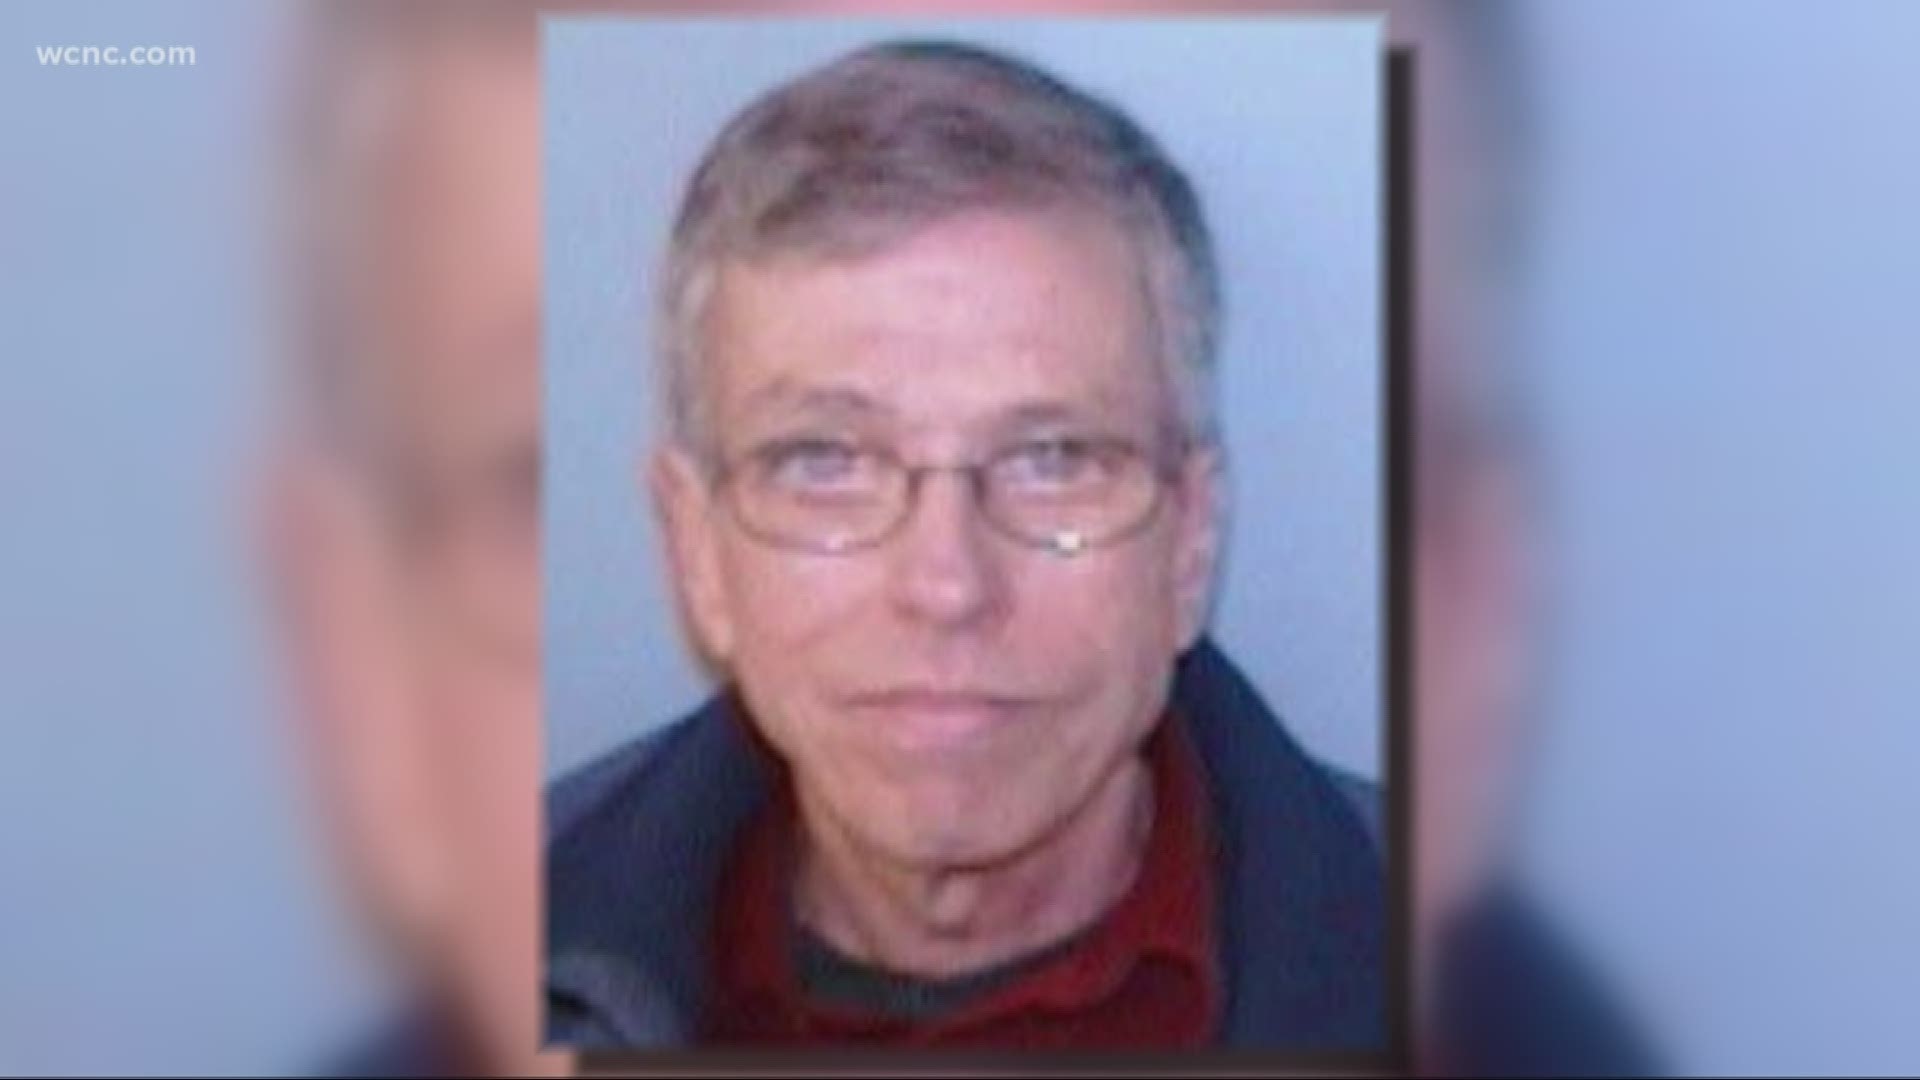 Authorities in Rowan County are receiving assistance from across the state in their search to find a missing man with dementia.